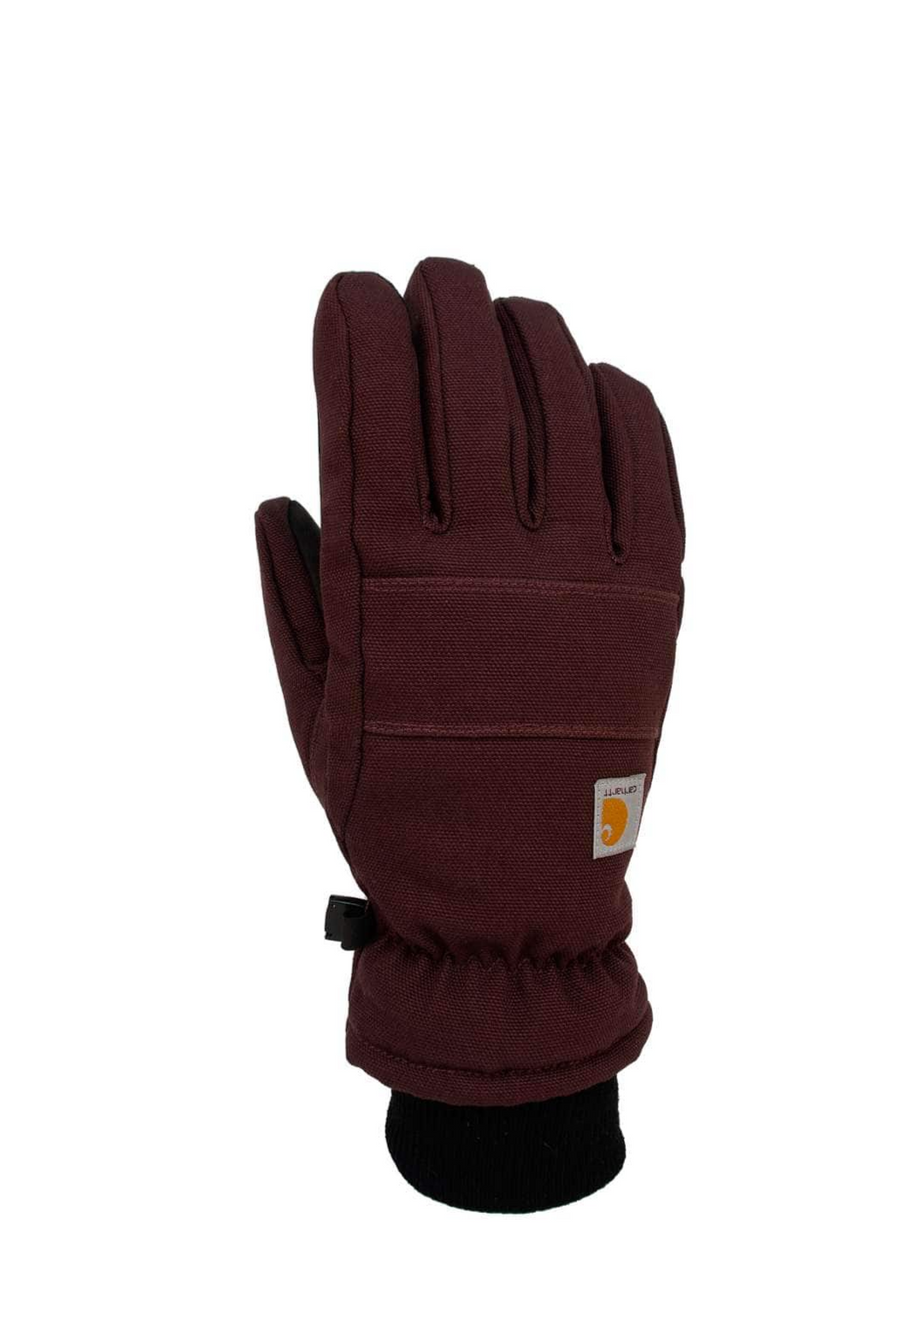 CARHARTT WOMEN'S INSULATED DUCK/SYNTHETIC LEATHER KNIT CUFF GLOVE GL0781W